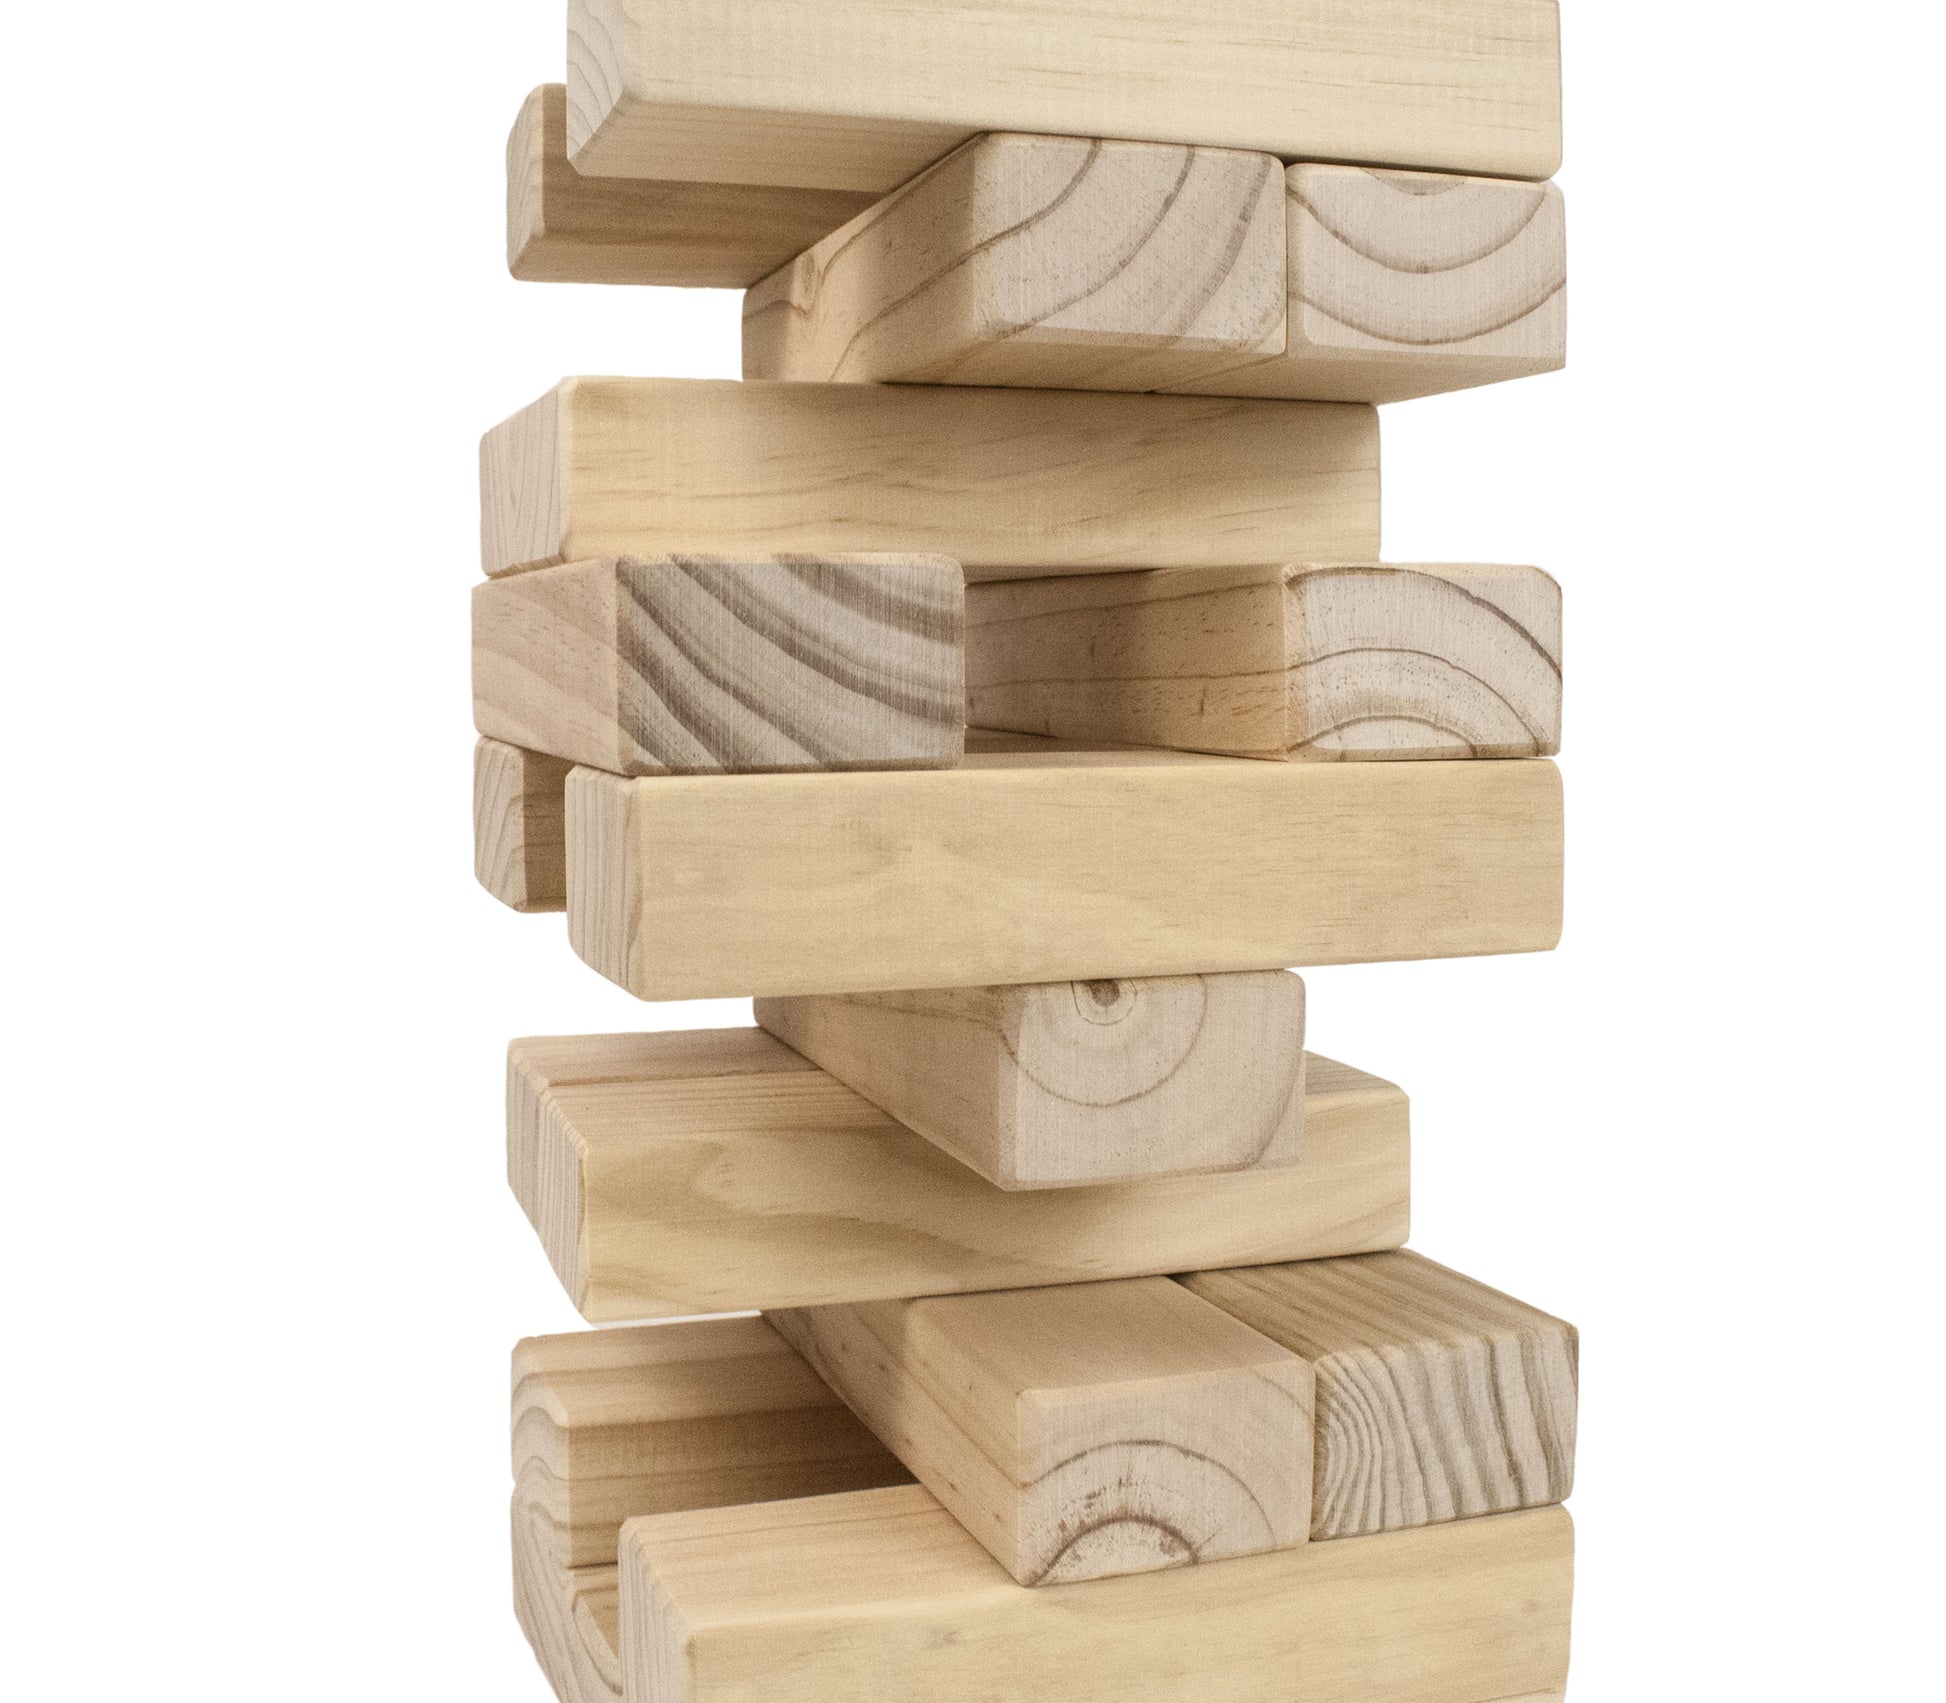 Wood City Wooden Giant Timber Tower with Dice jenga games